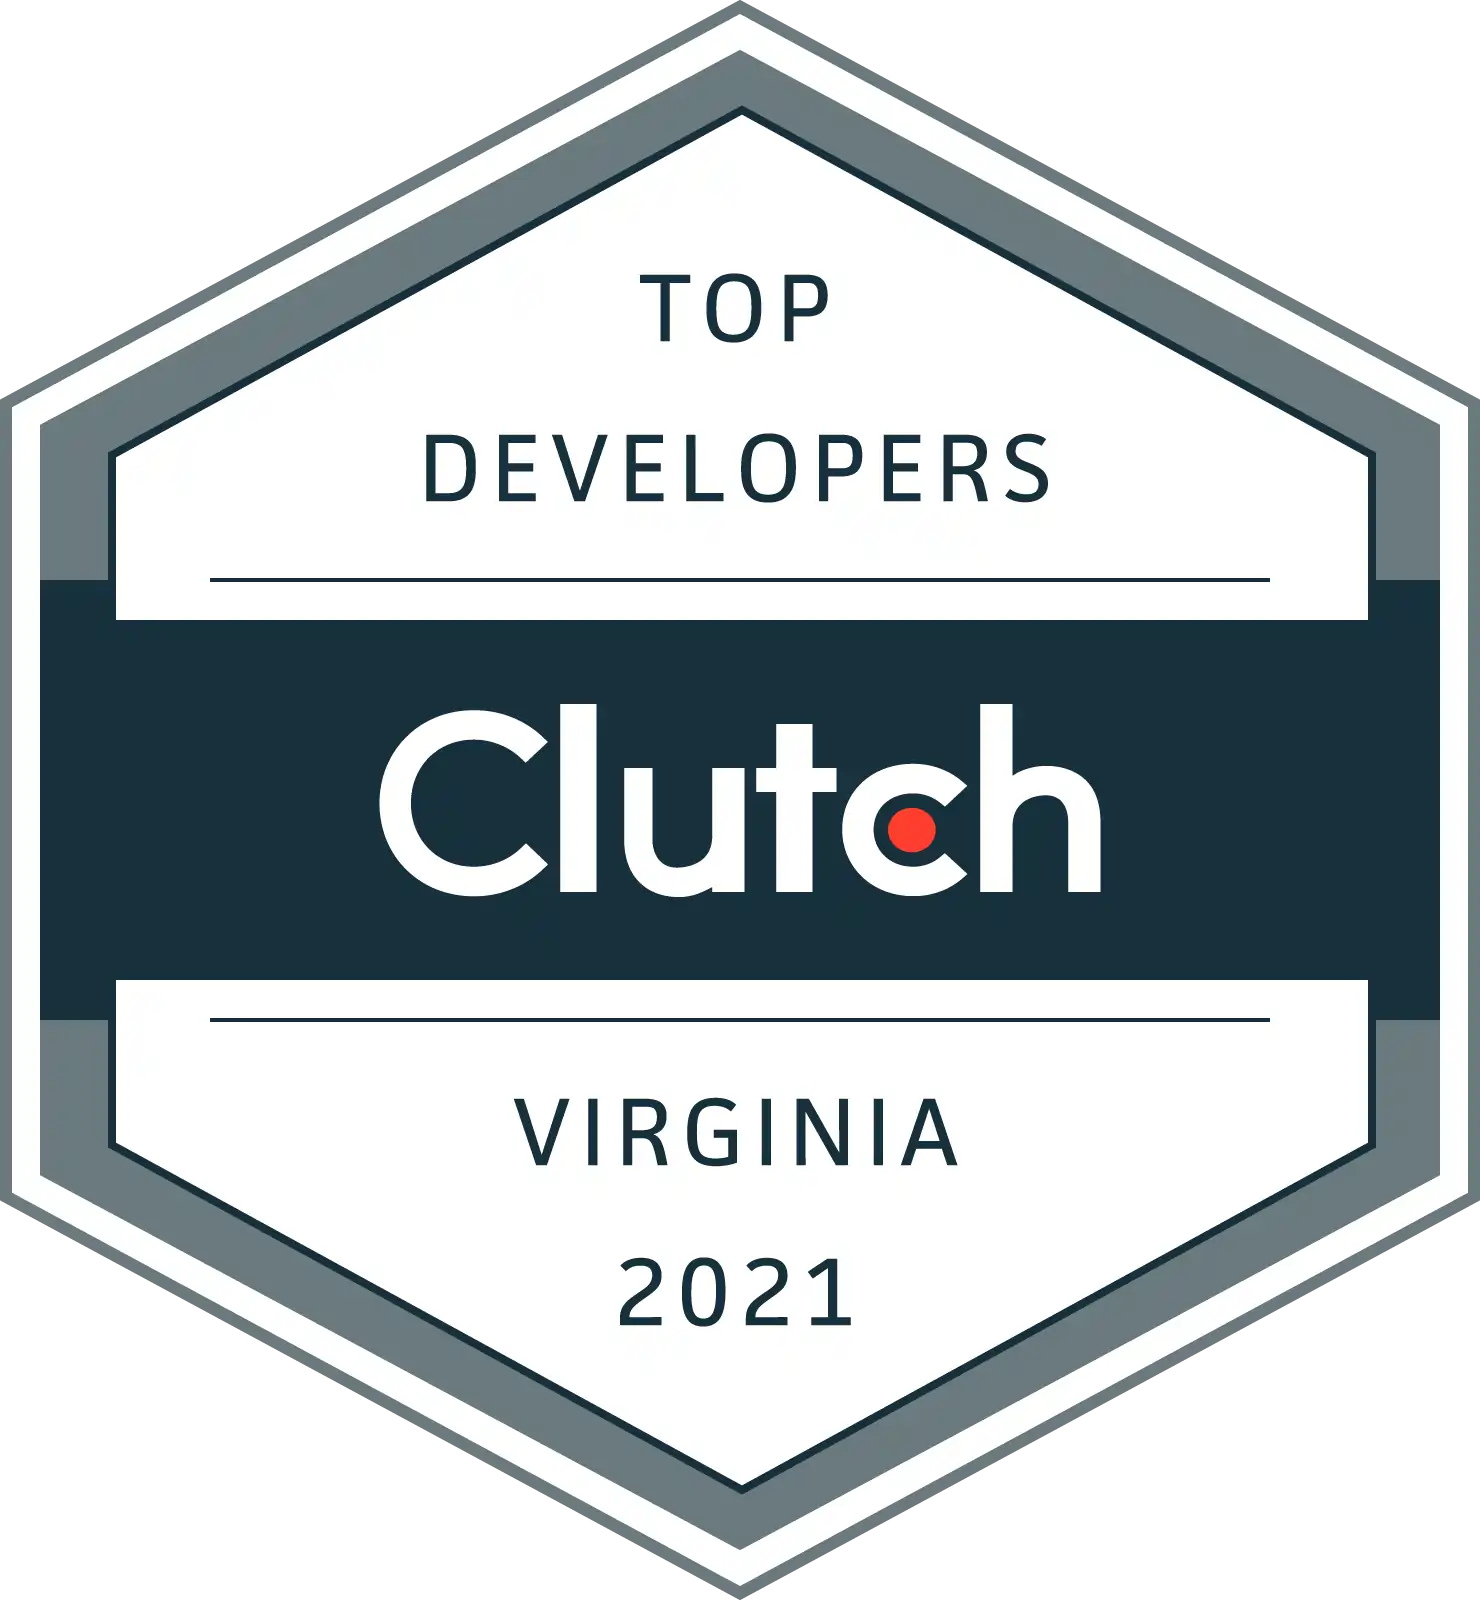 Our reviews on Clutch